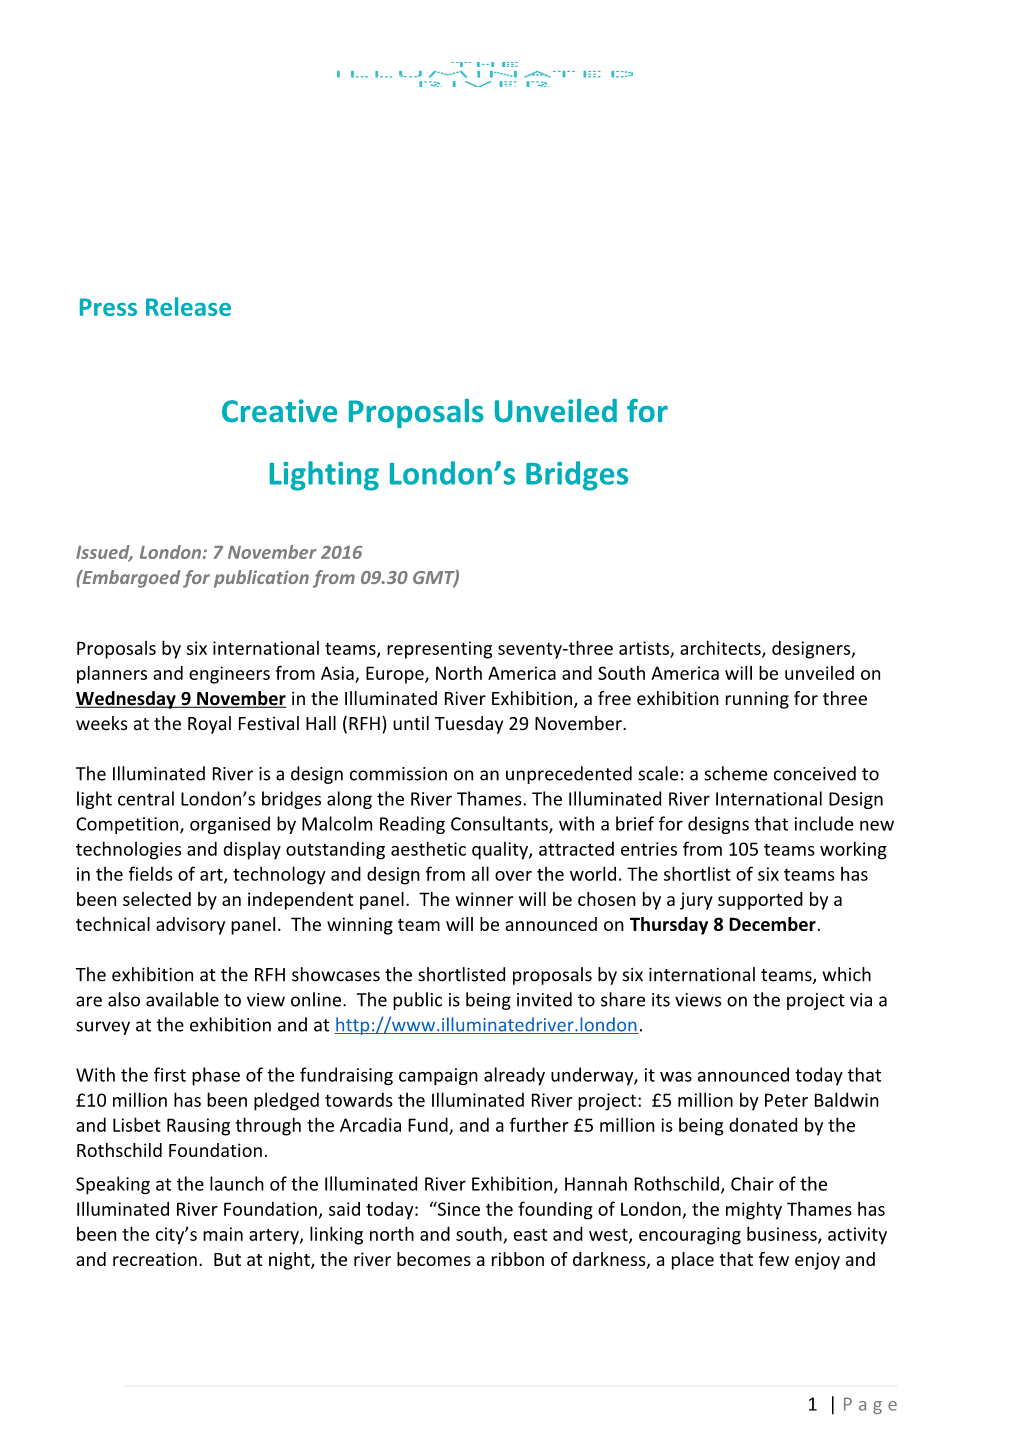 Creative Proposals Unveiled For